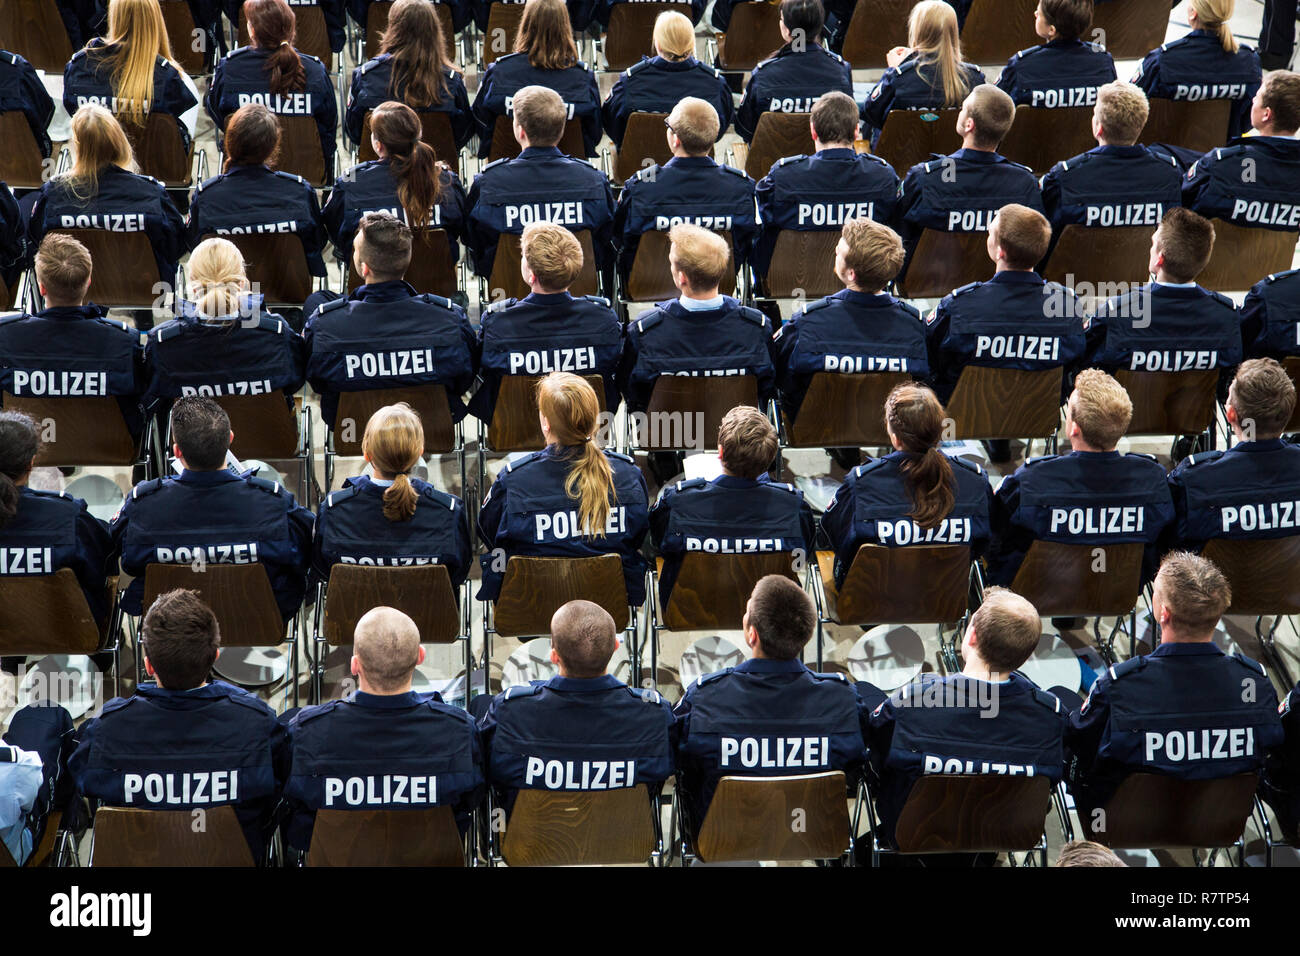 Police commissioner candidates, trainees of the Polizei NRW or North Rhine-Westphalia Police, sitting at a meeting in an Stock Photo